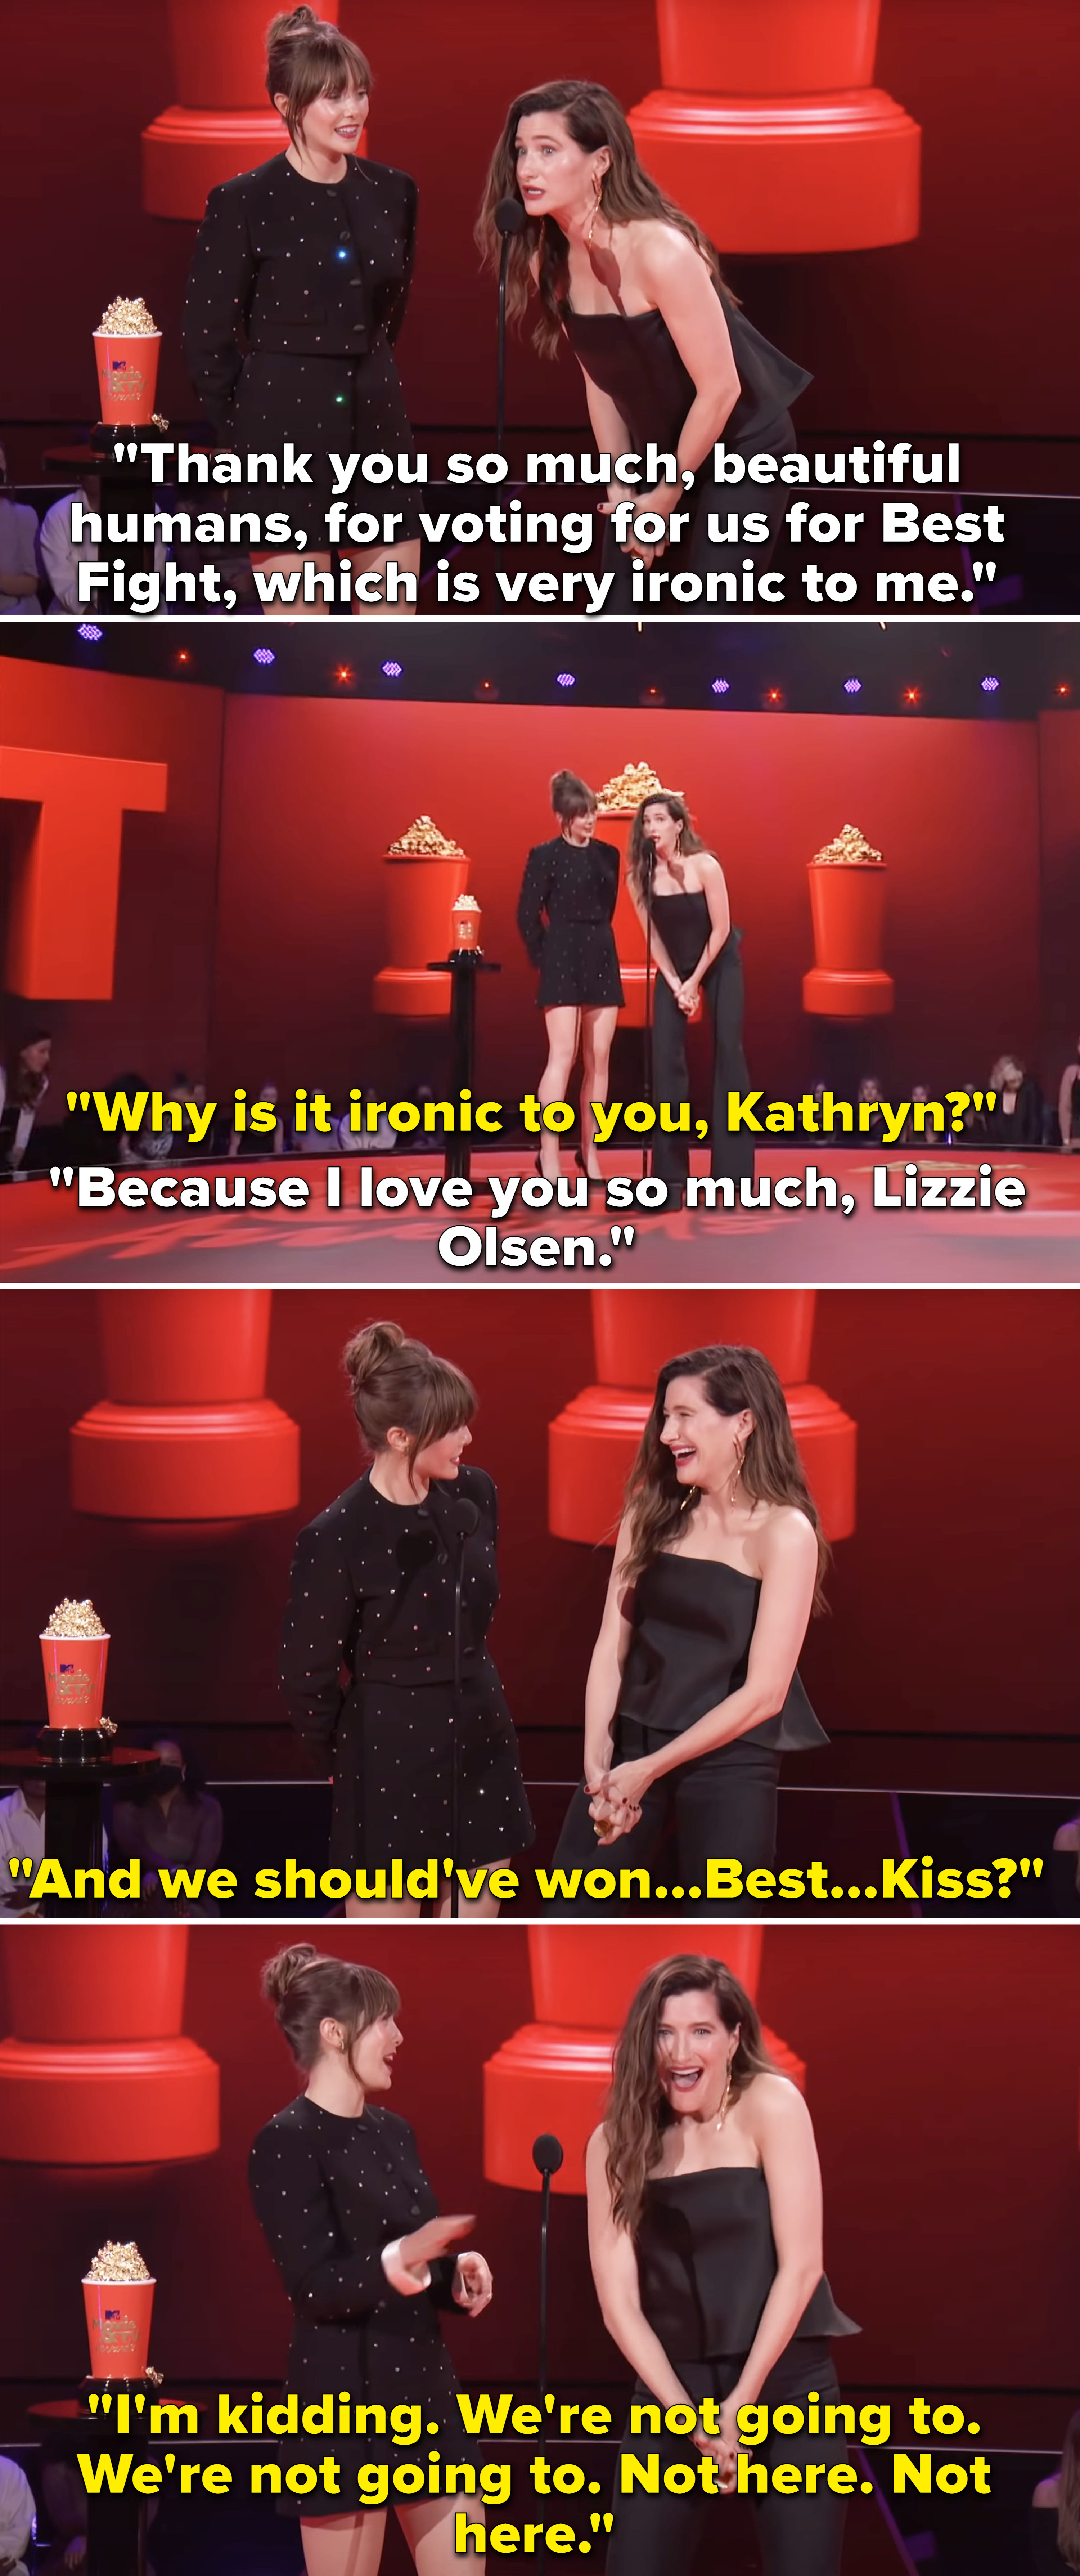 Elizabeth Olsen and Kathryn Hawn accepting an award for Best Fight, but saying, &quot;And we should&#x27;ve won...Best...Kiss?&quot;